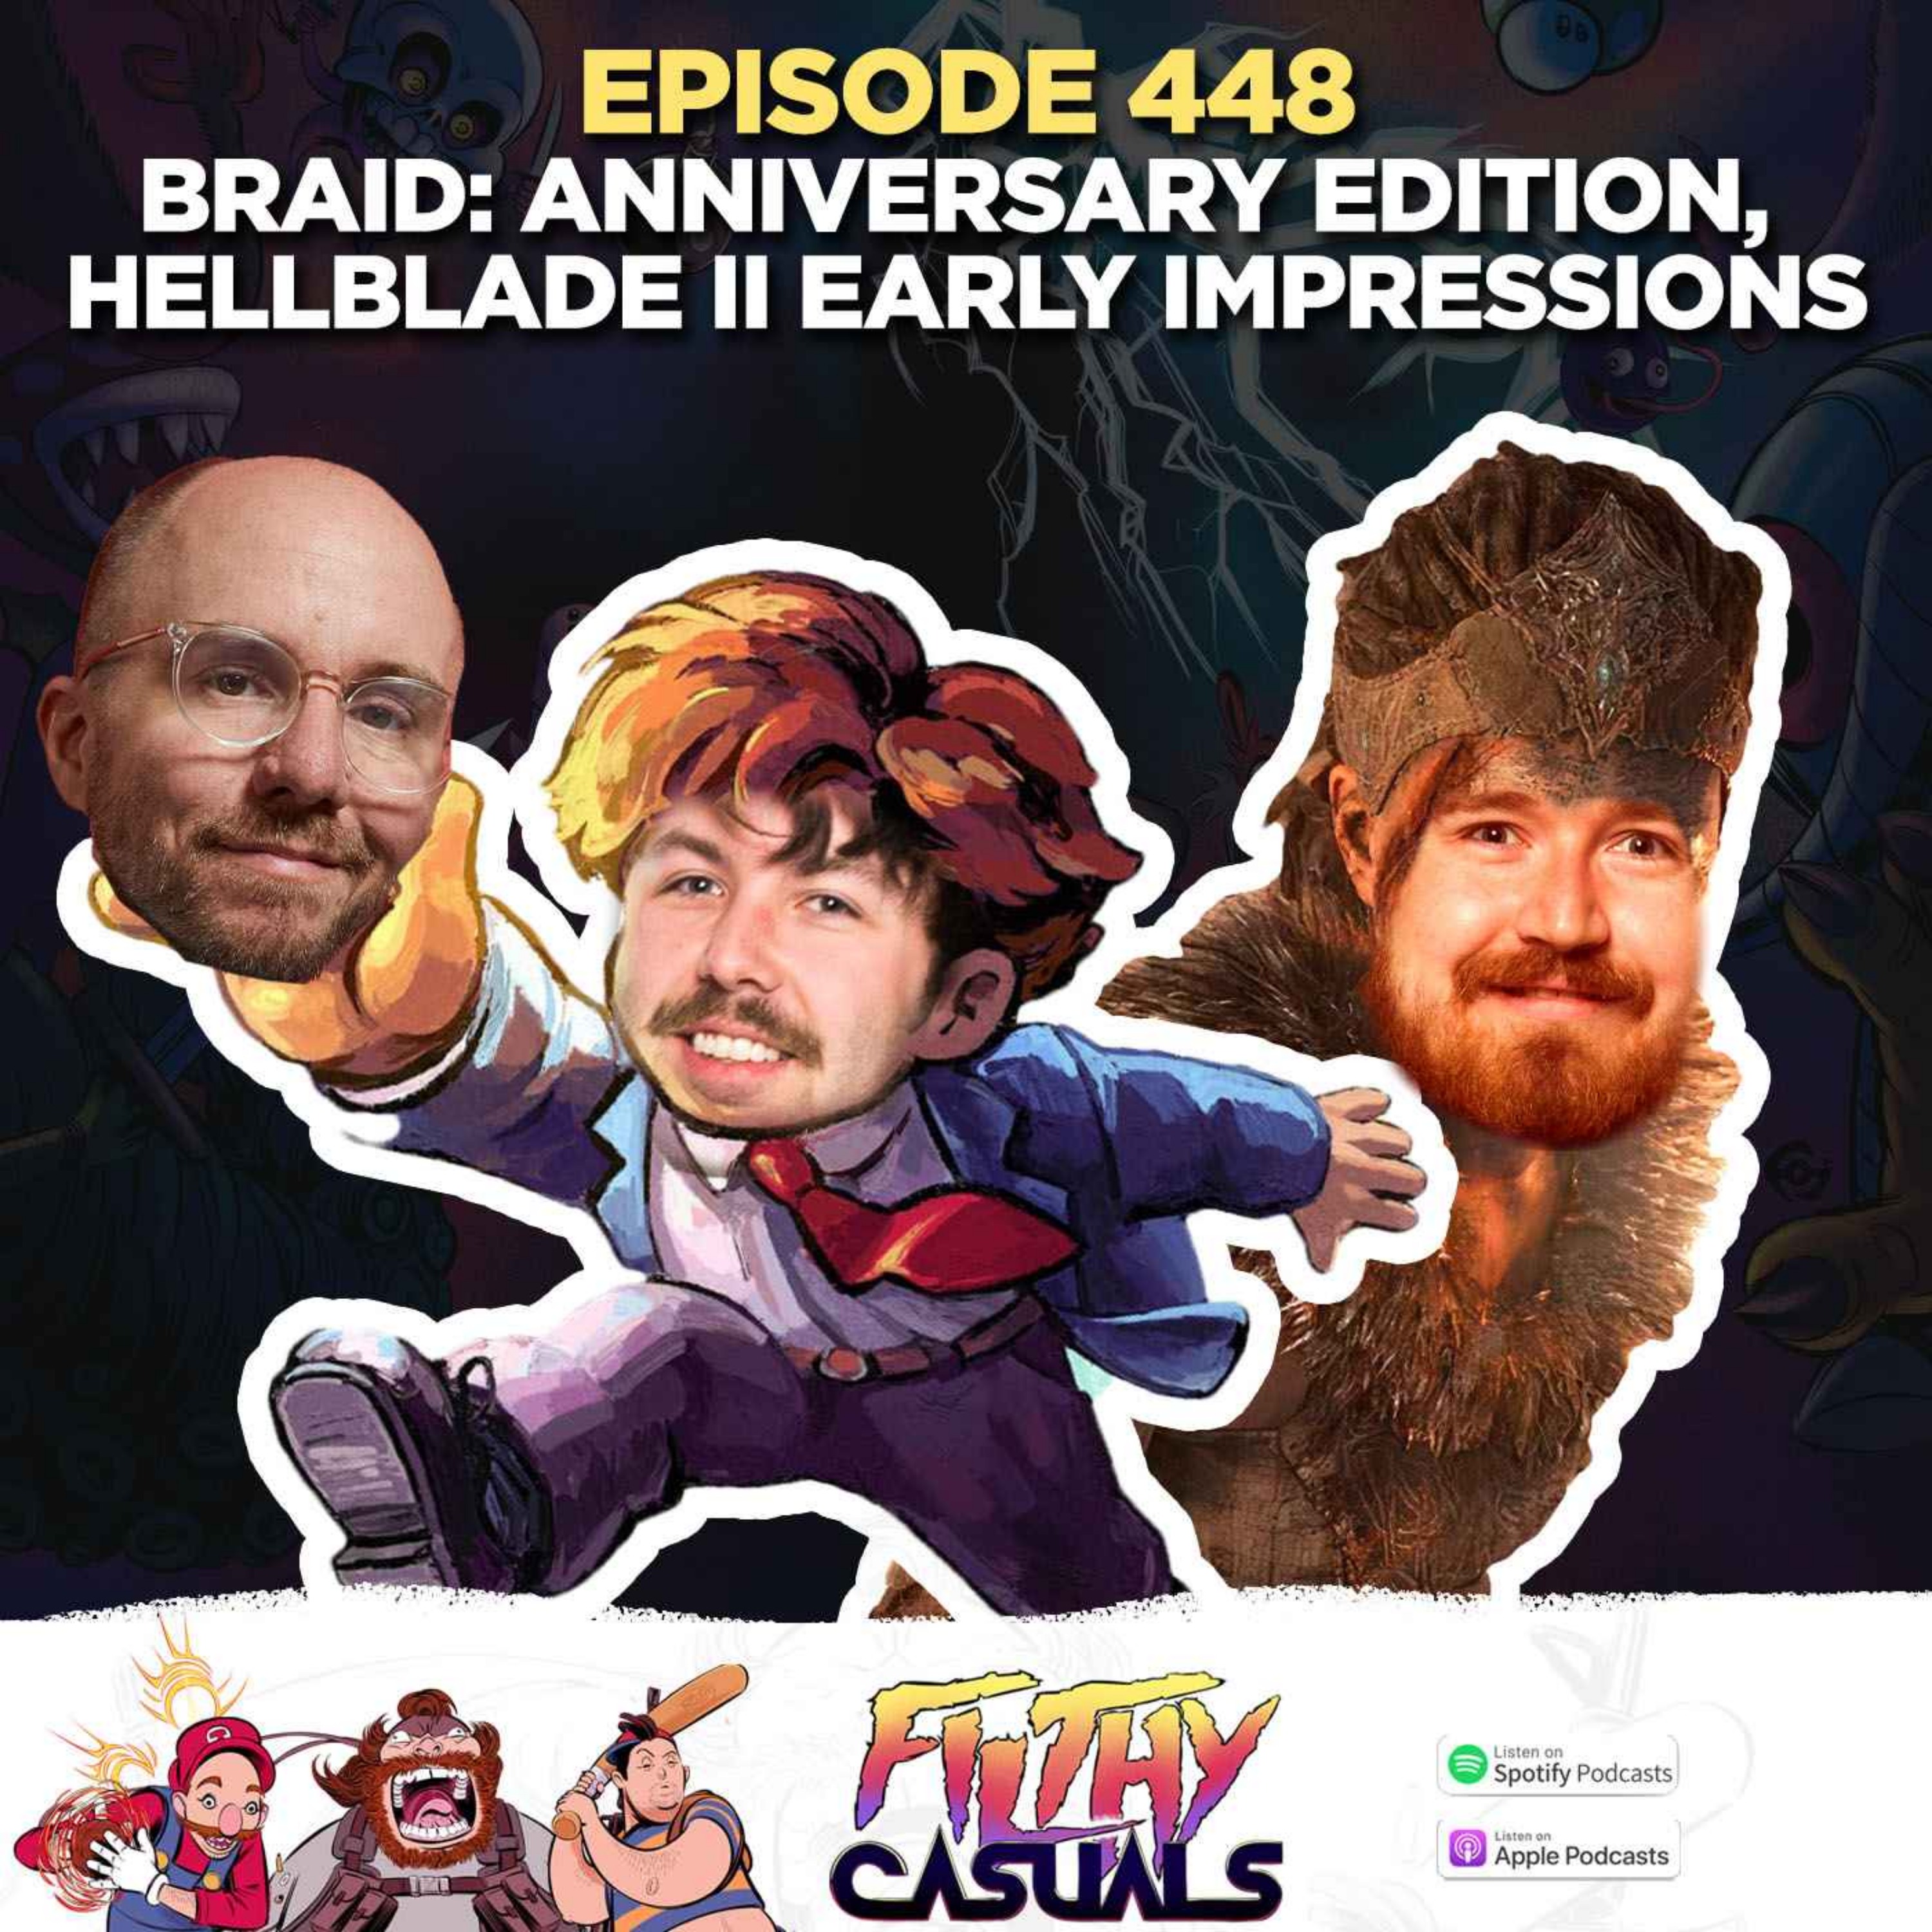 Episode 448: Braid: Anniversary Edition, Hellblade II Early Impressions